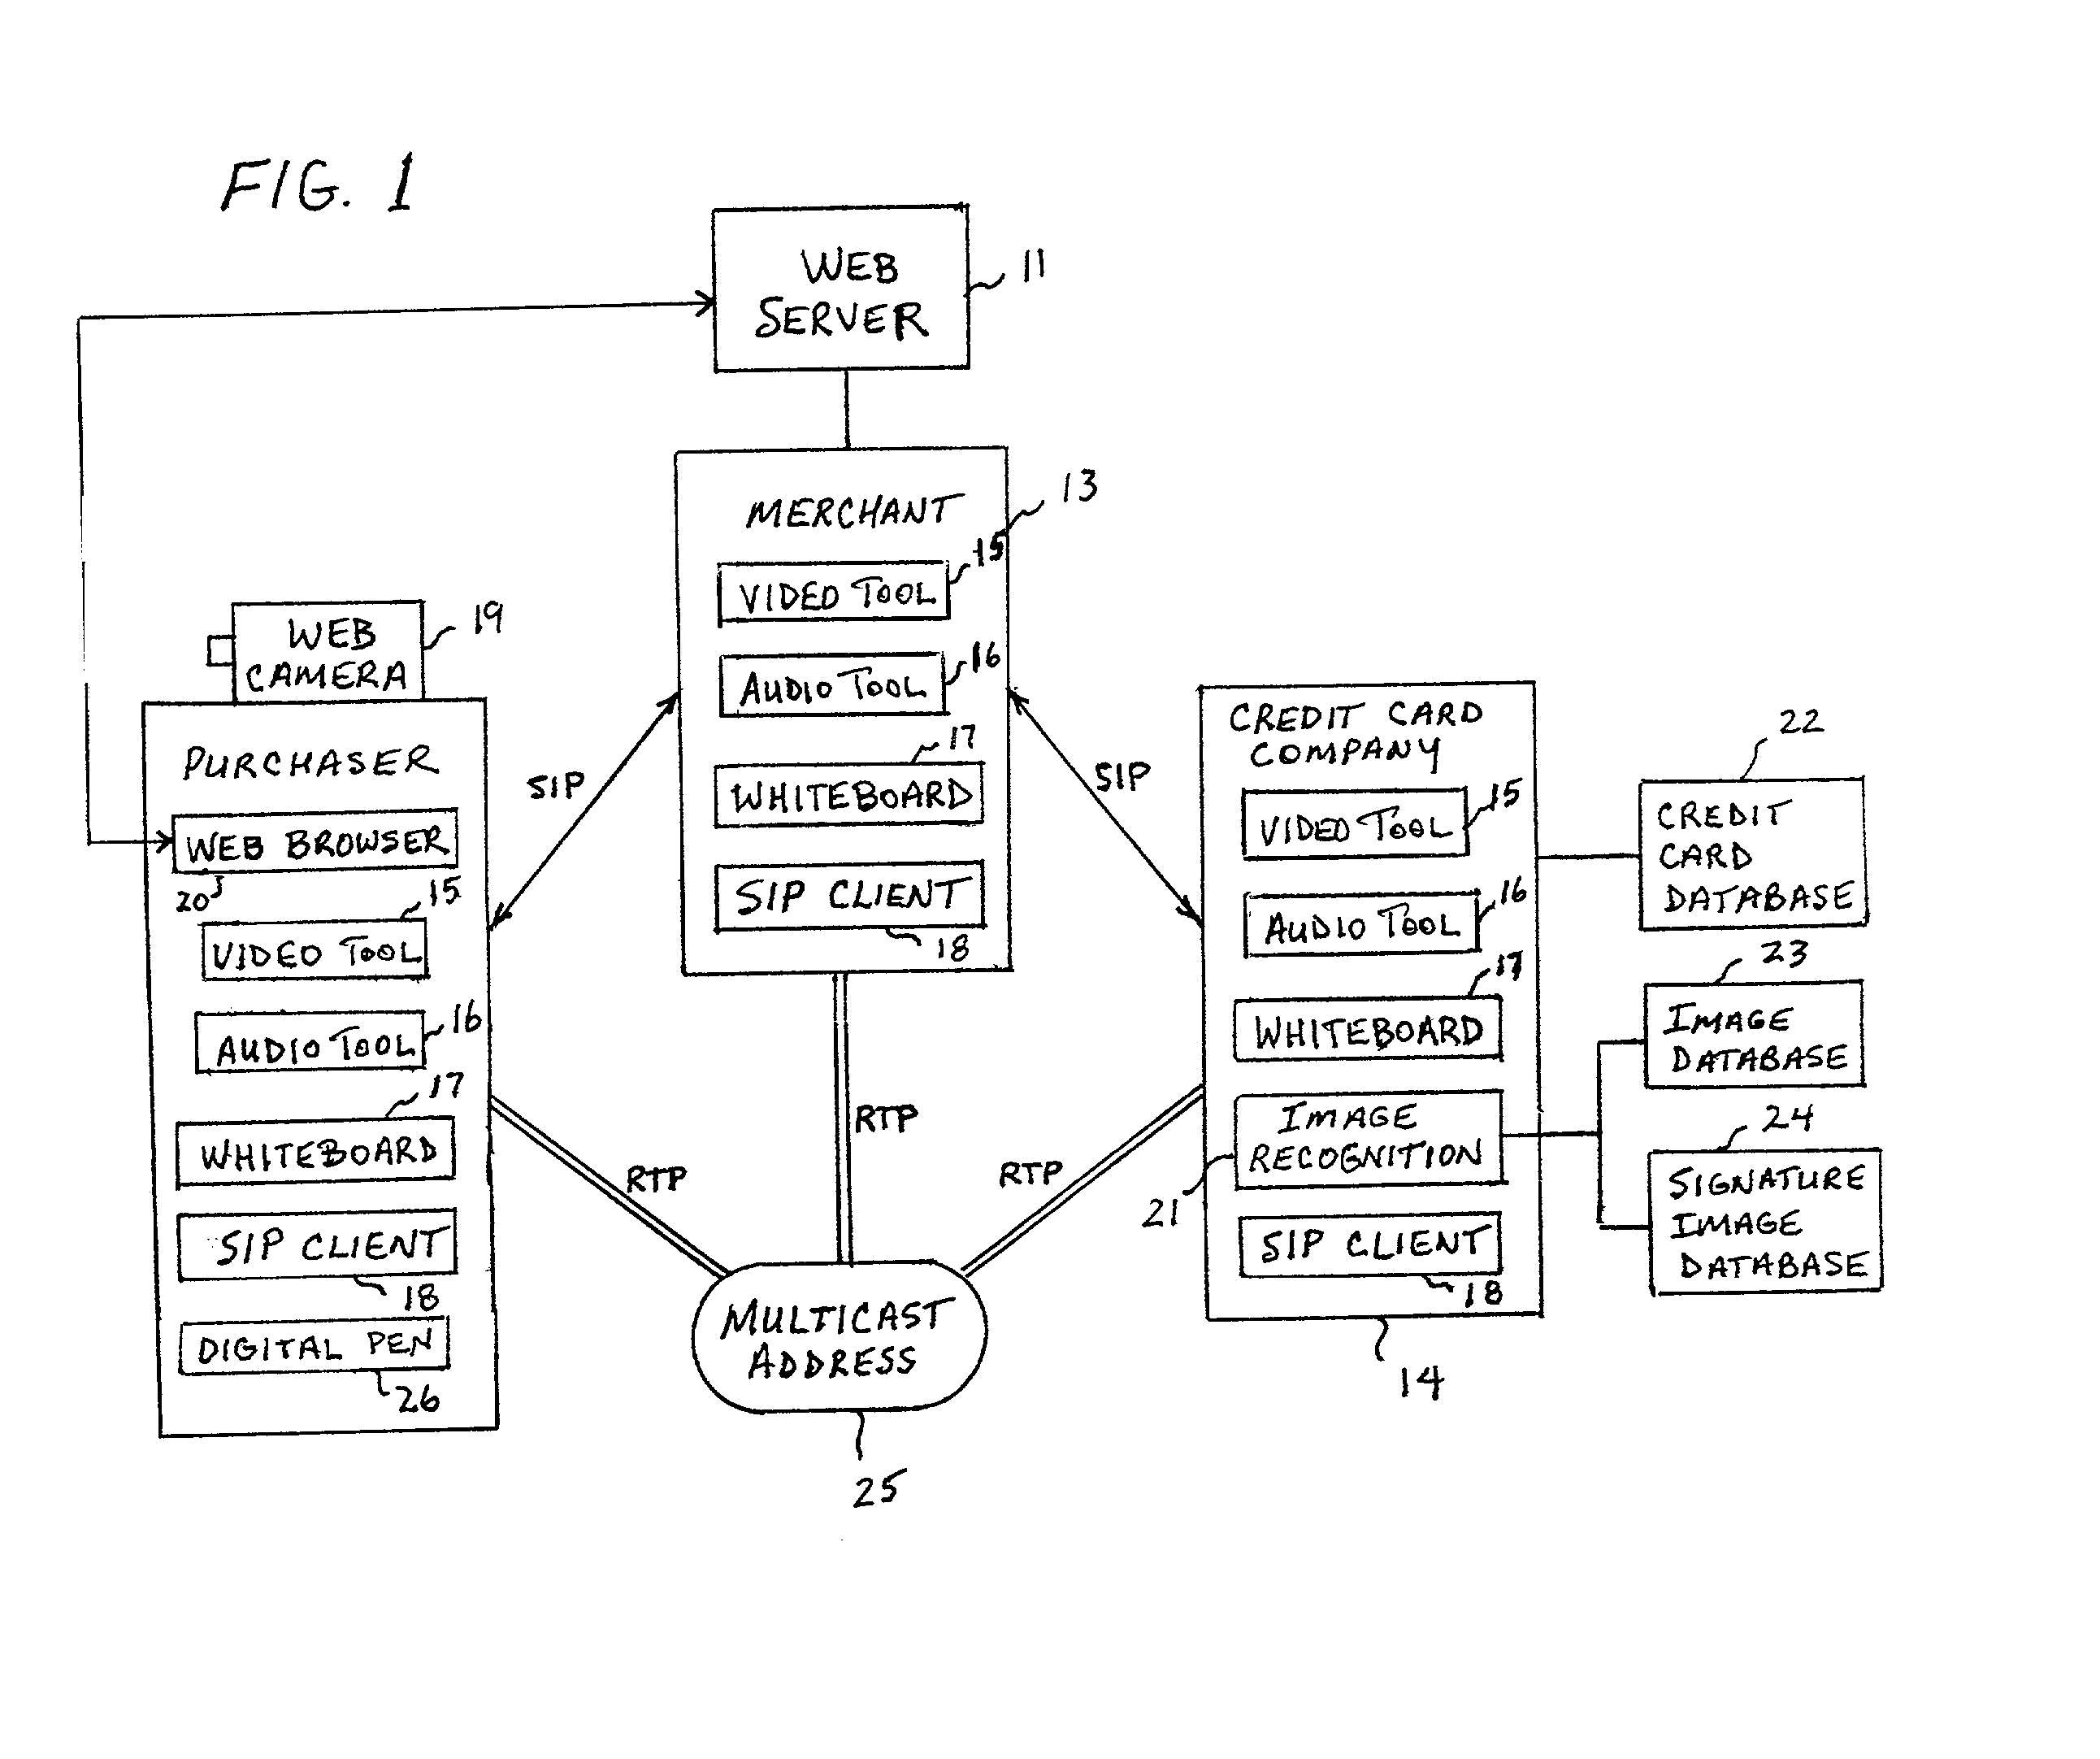 System and method of authorizing an electronic commerce transaction